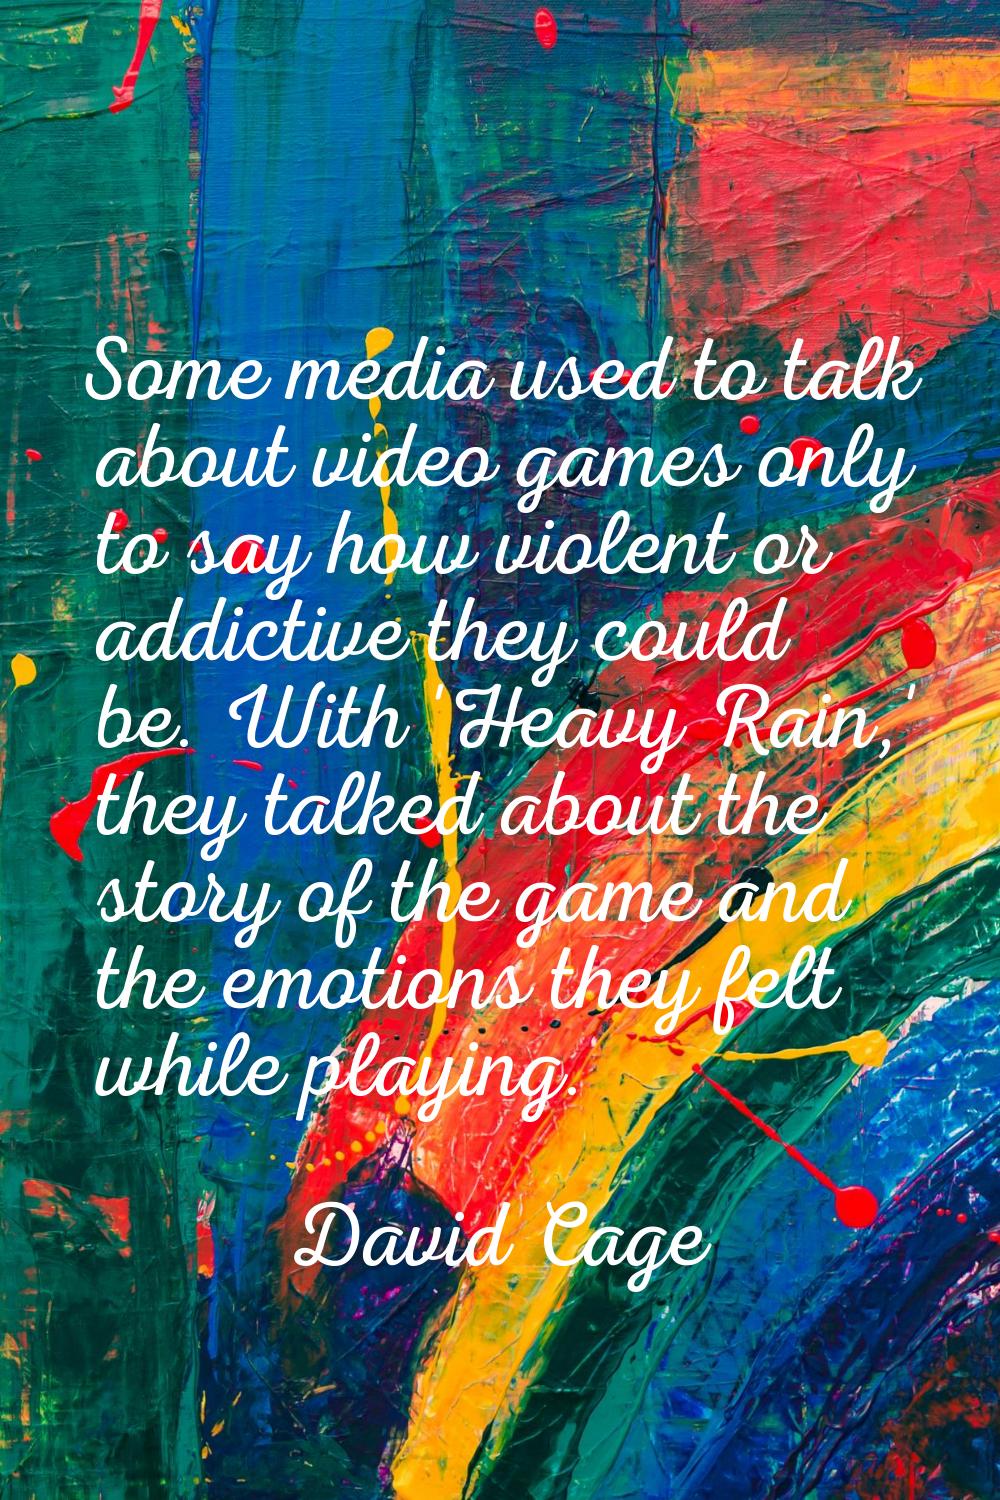 Some media used to talk about video games only to say how violent or addictive they could be. With 